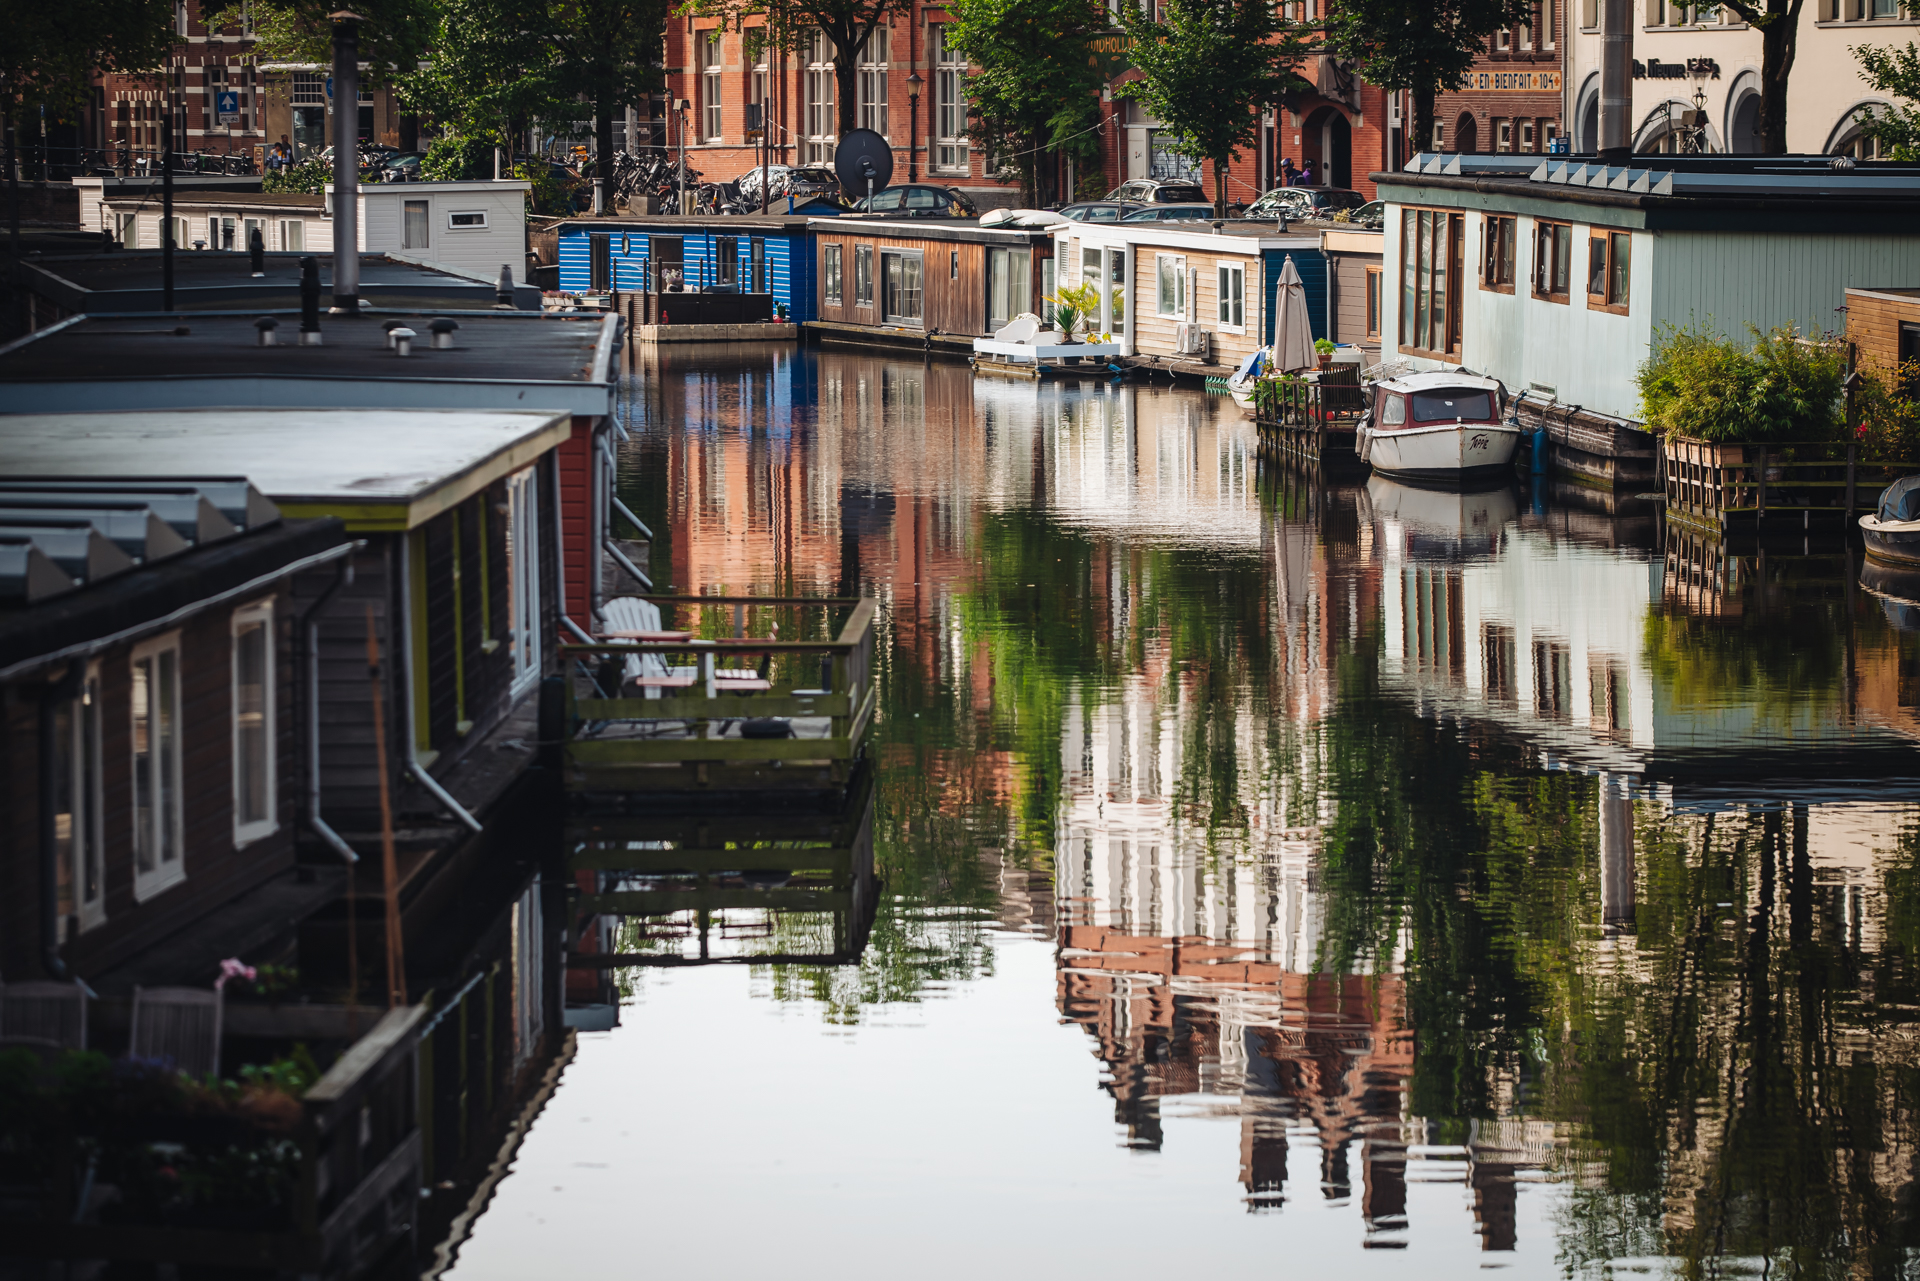 Boat houses in Amsterdam